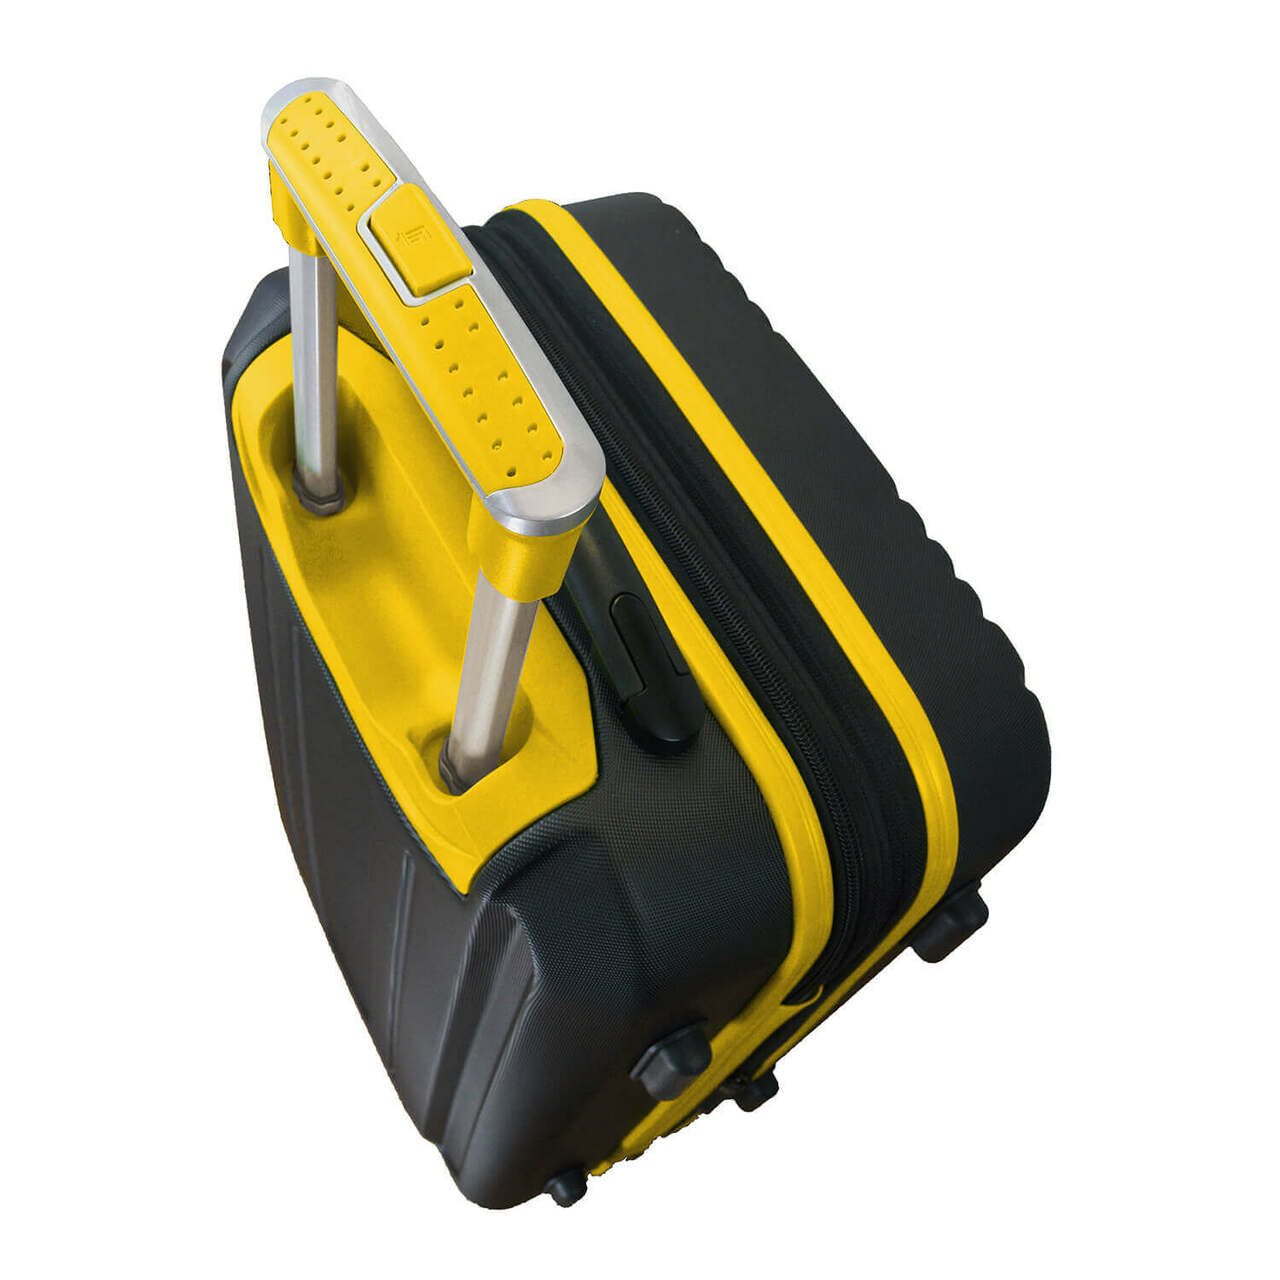 Blues Carry On Spinner Luggage | St Louis Blues Hardcase Two-Tone Luggage Carry-on Spinner in Yellow